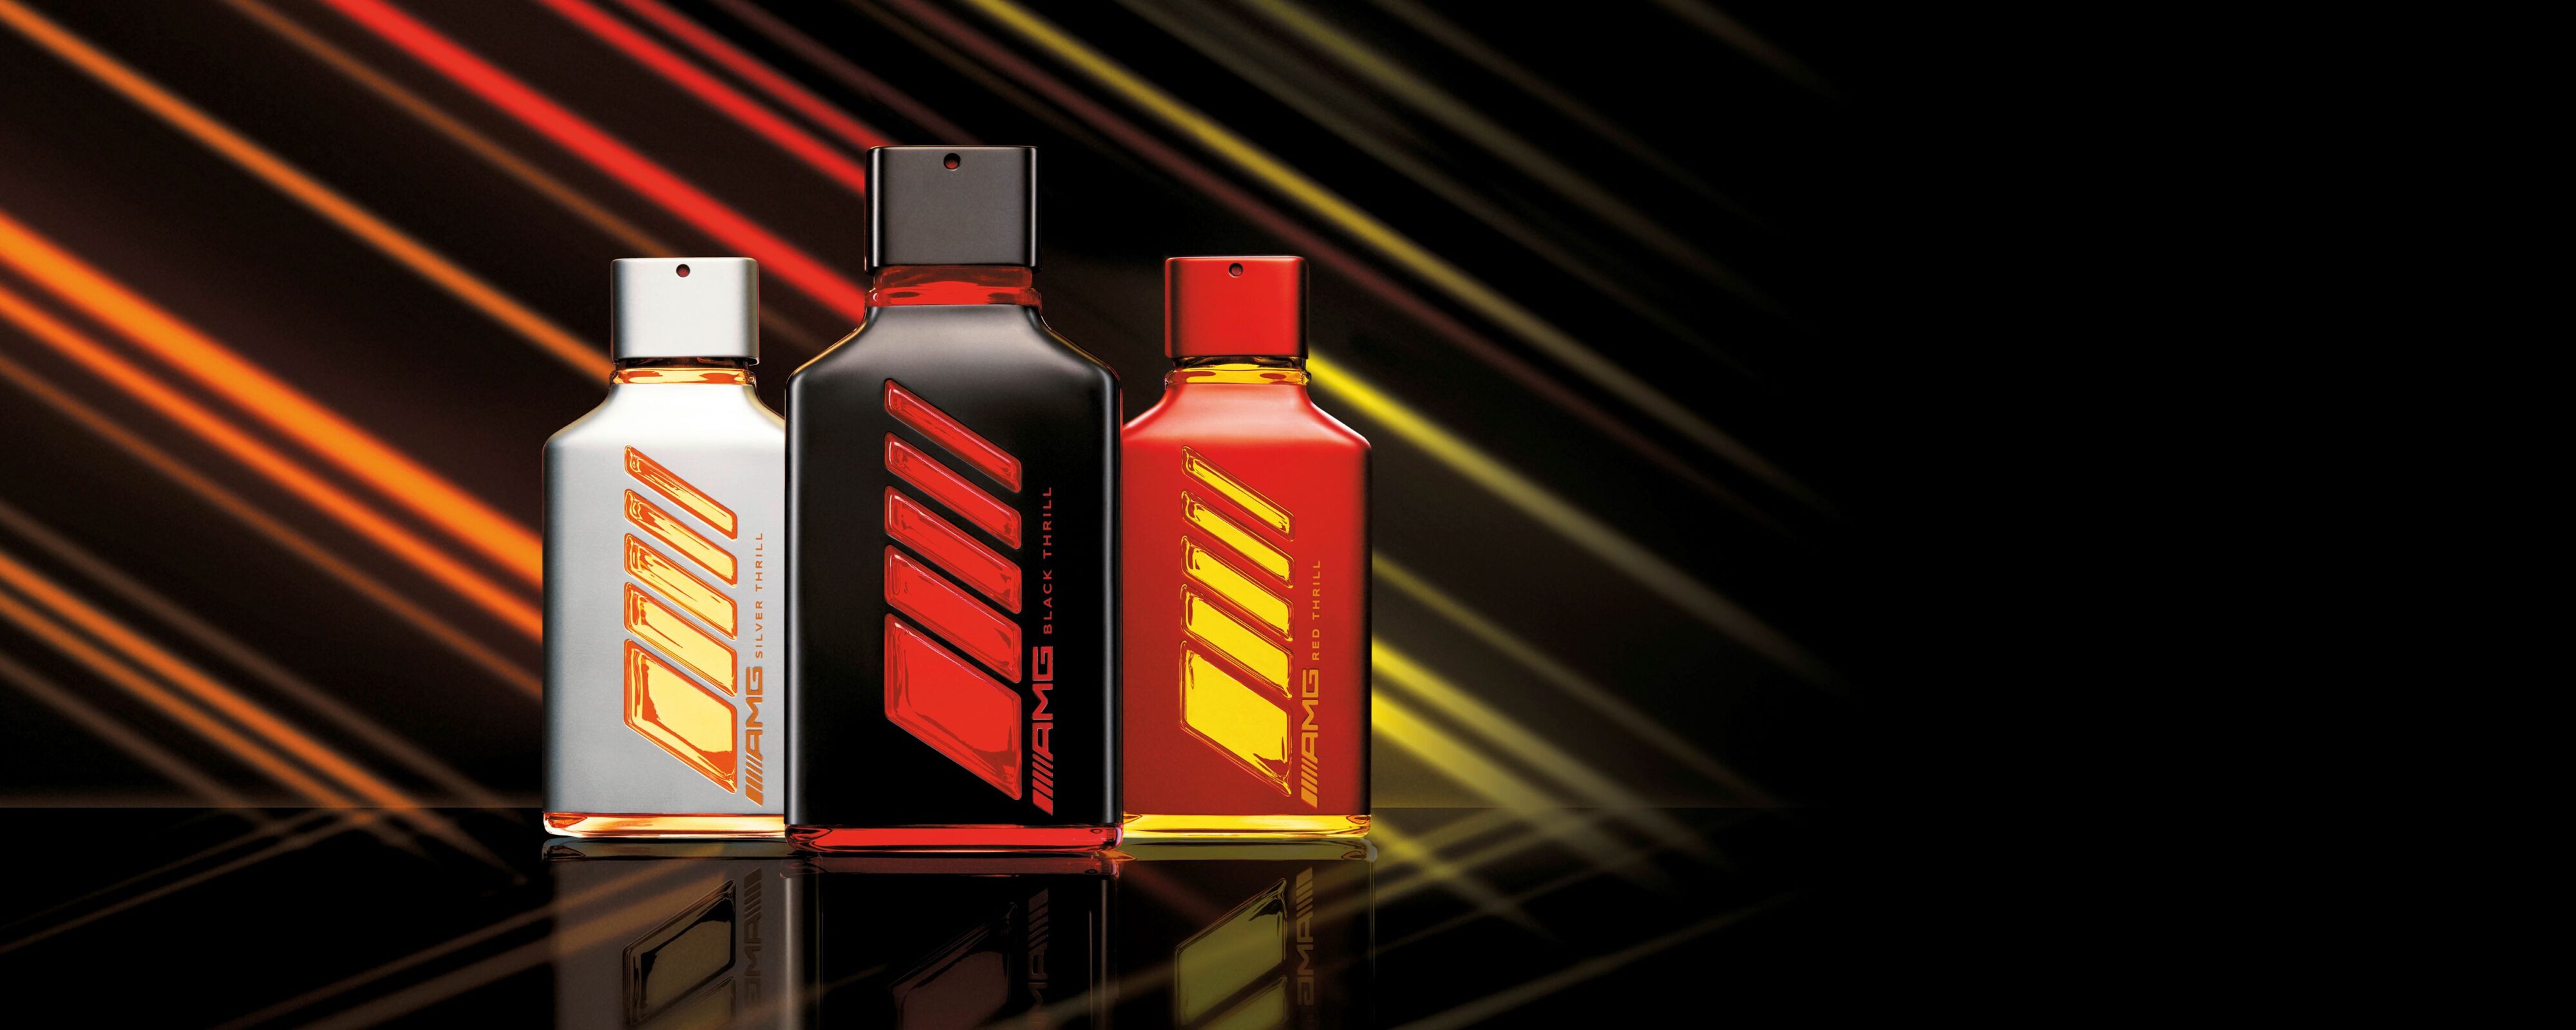 Promotional photo of a trio of Mercedes-AMG fragrances.